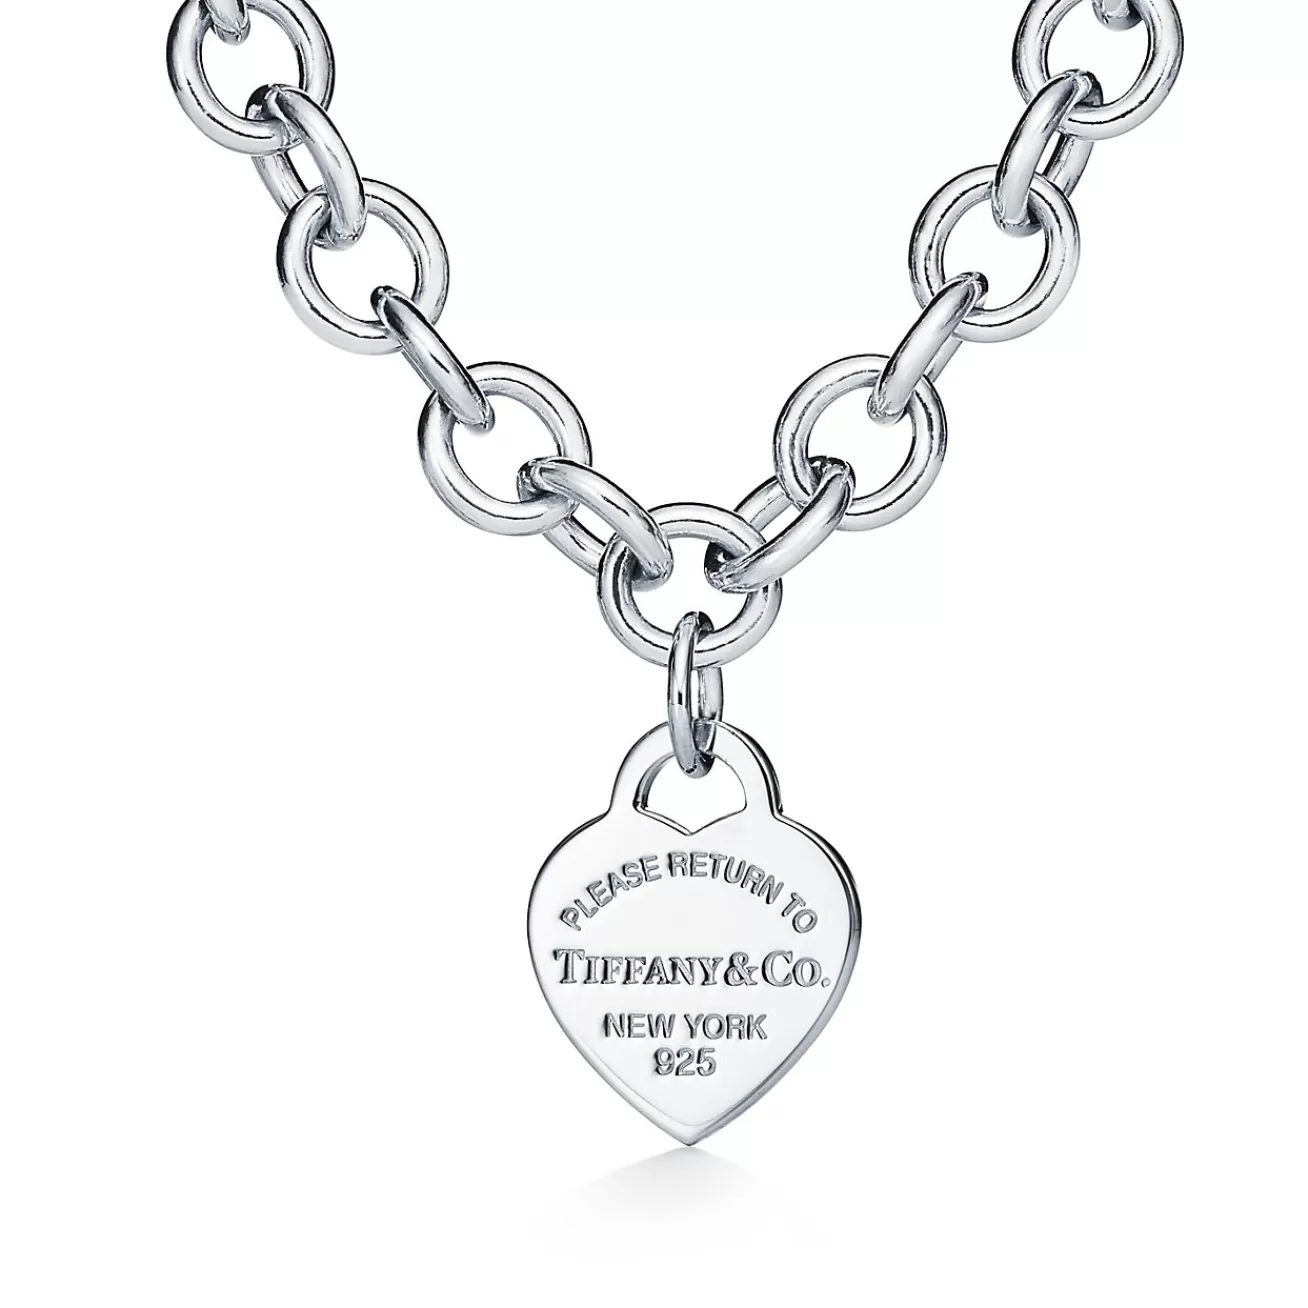 Tiffany & Co. Return to Tiffany® Heart Tag Chain Link Necklace in Silver | ^ Necklaces & Pendants | Gifts for Her